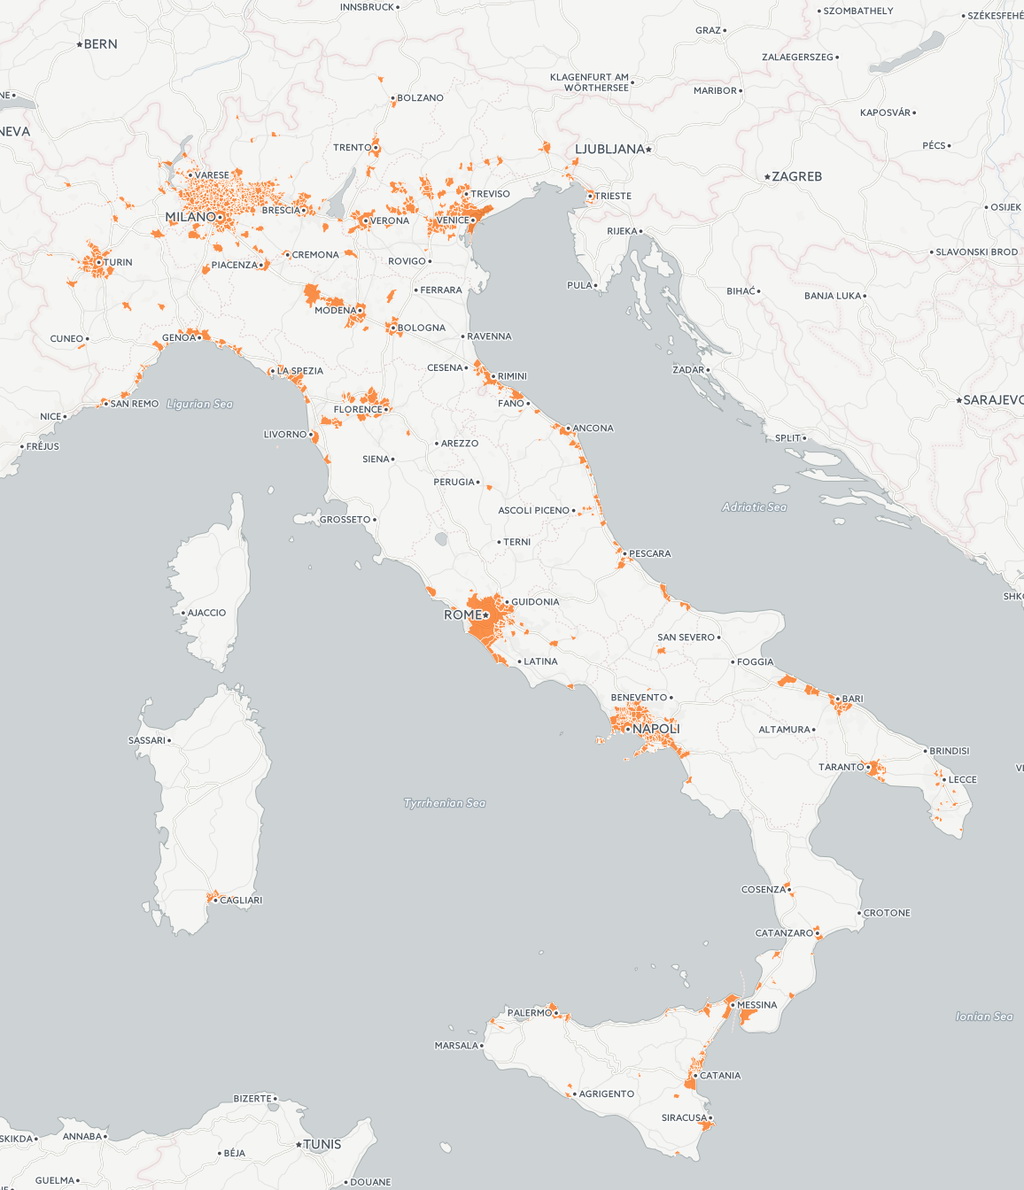 Half the population of Italy lives in the yellow area